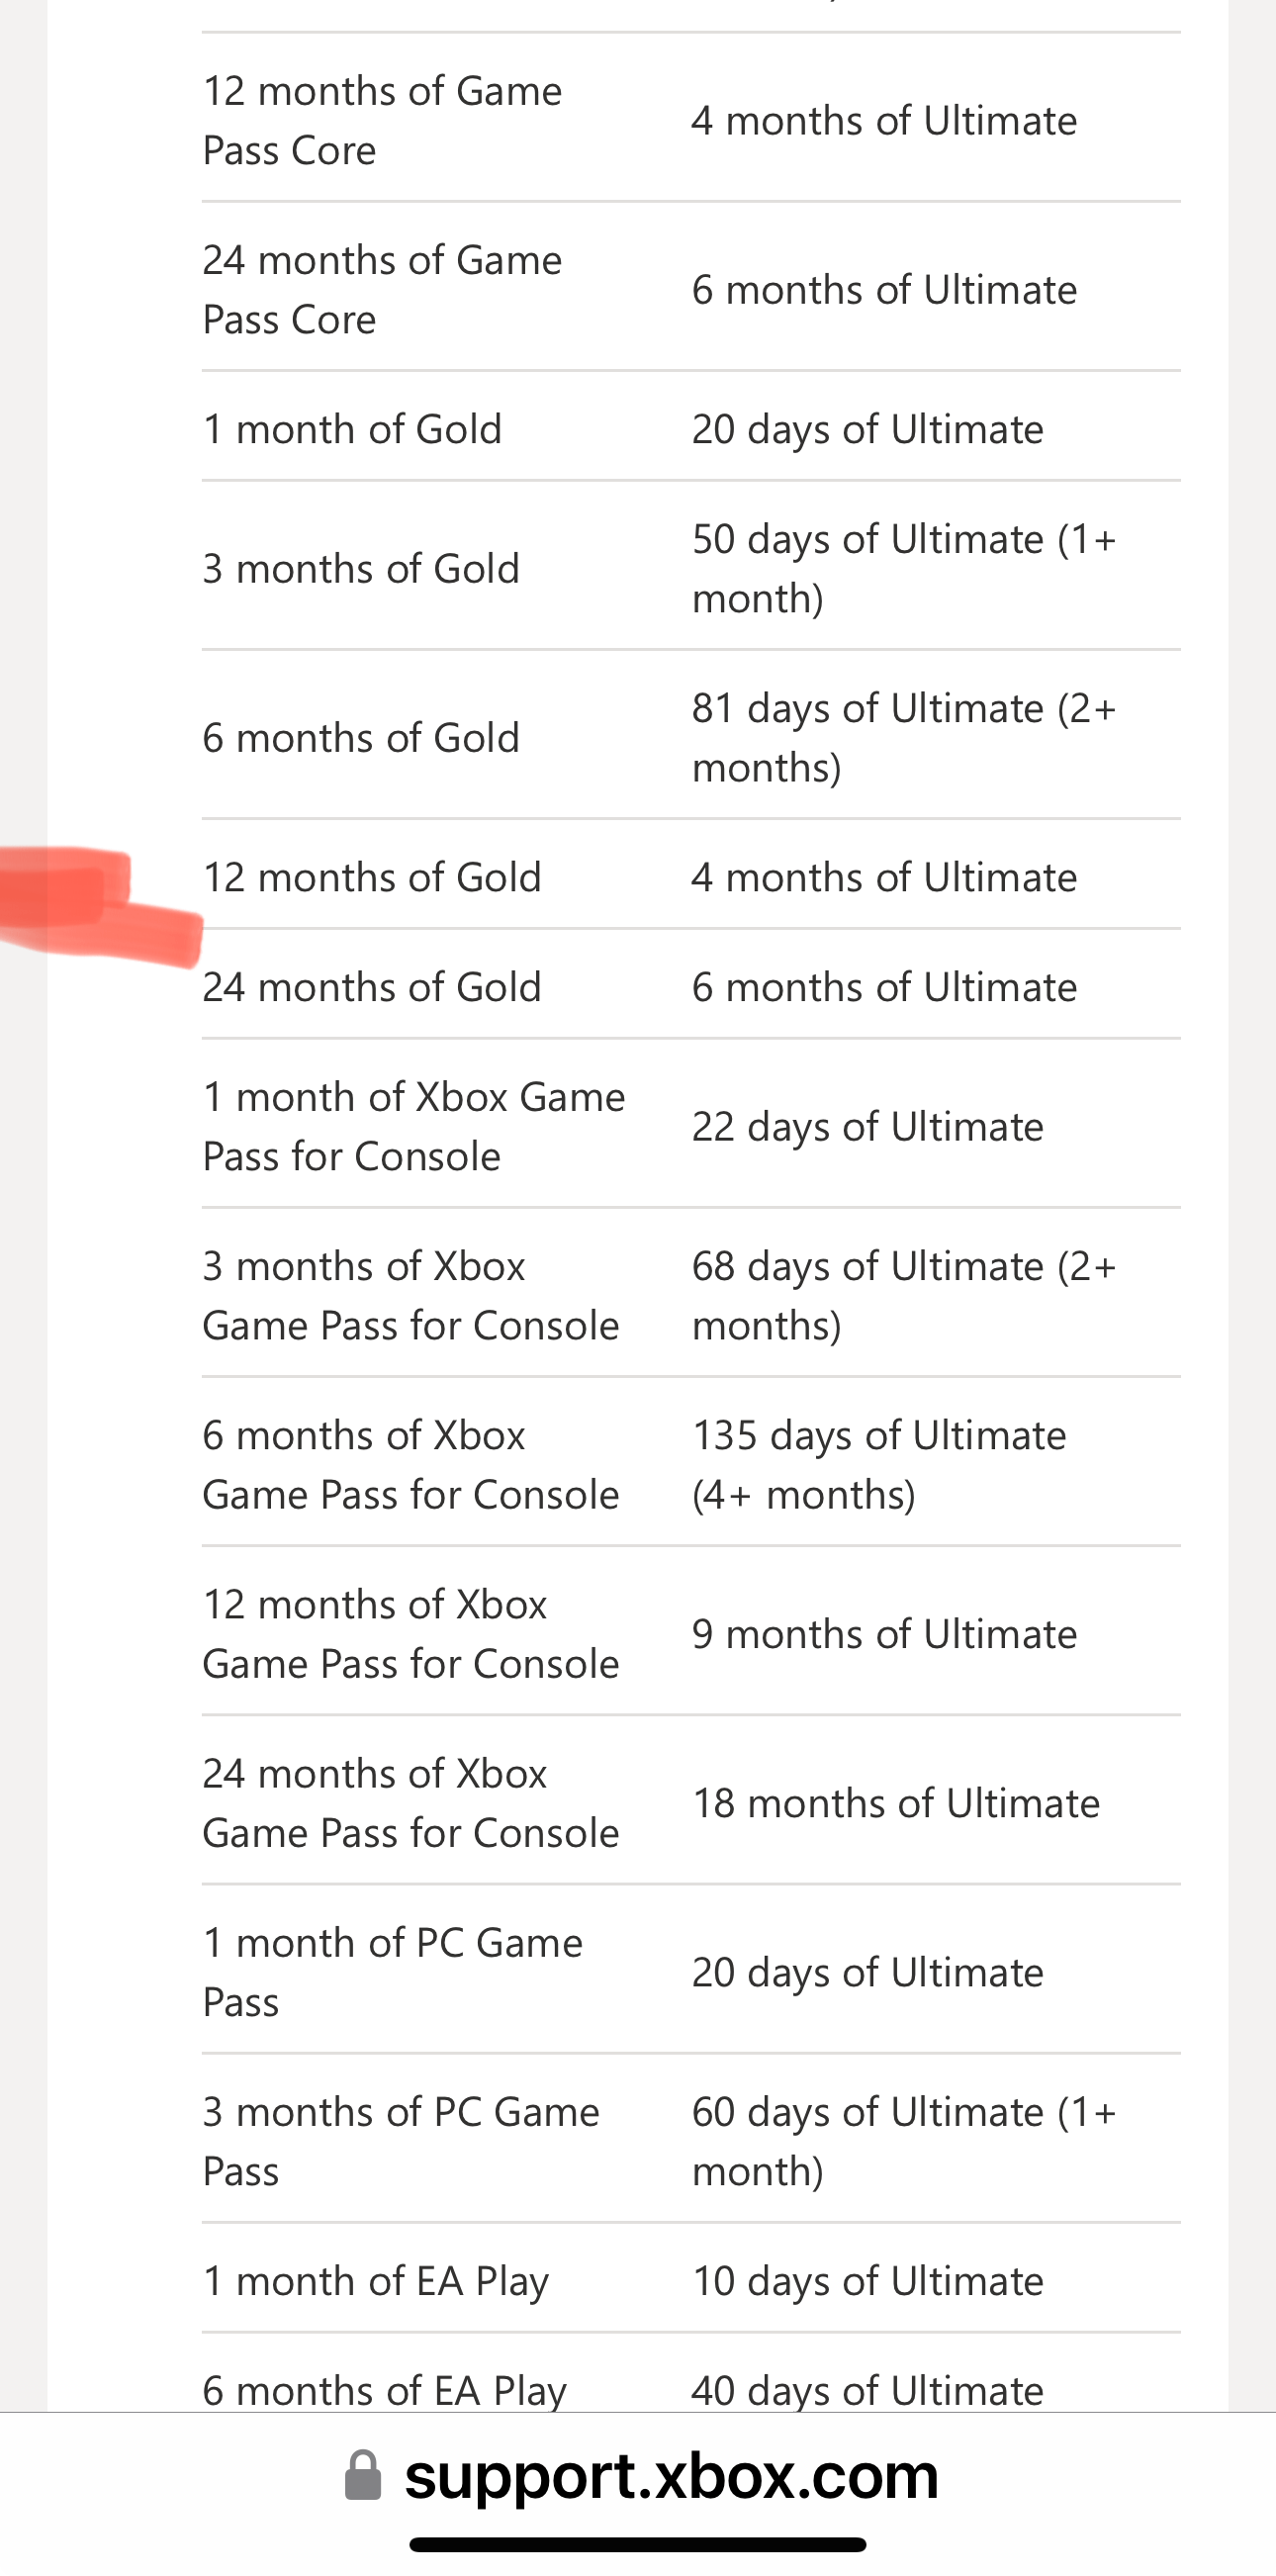 Xbox Game Pass Core — 1 Month Subscription [WW]